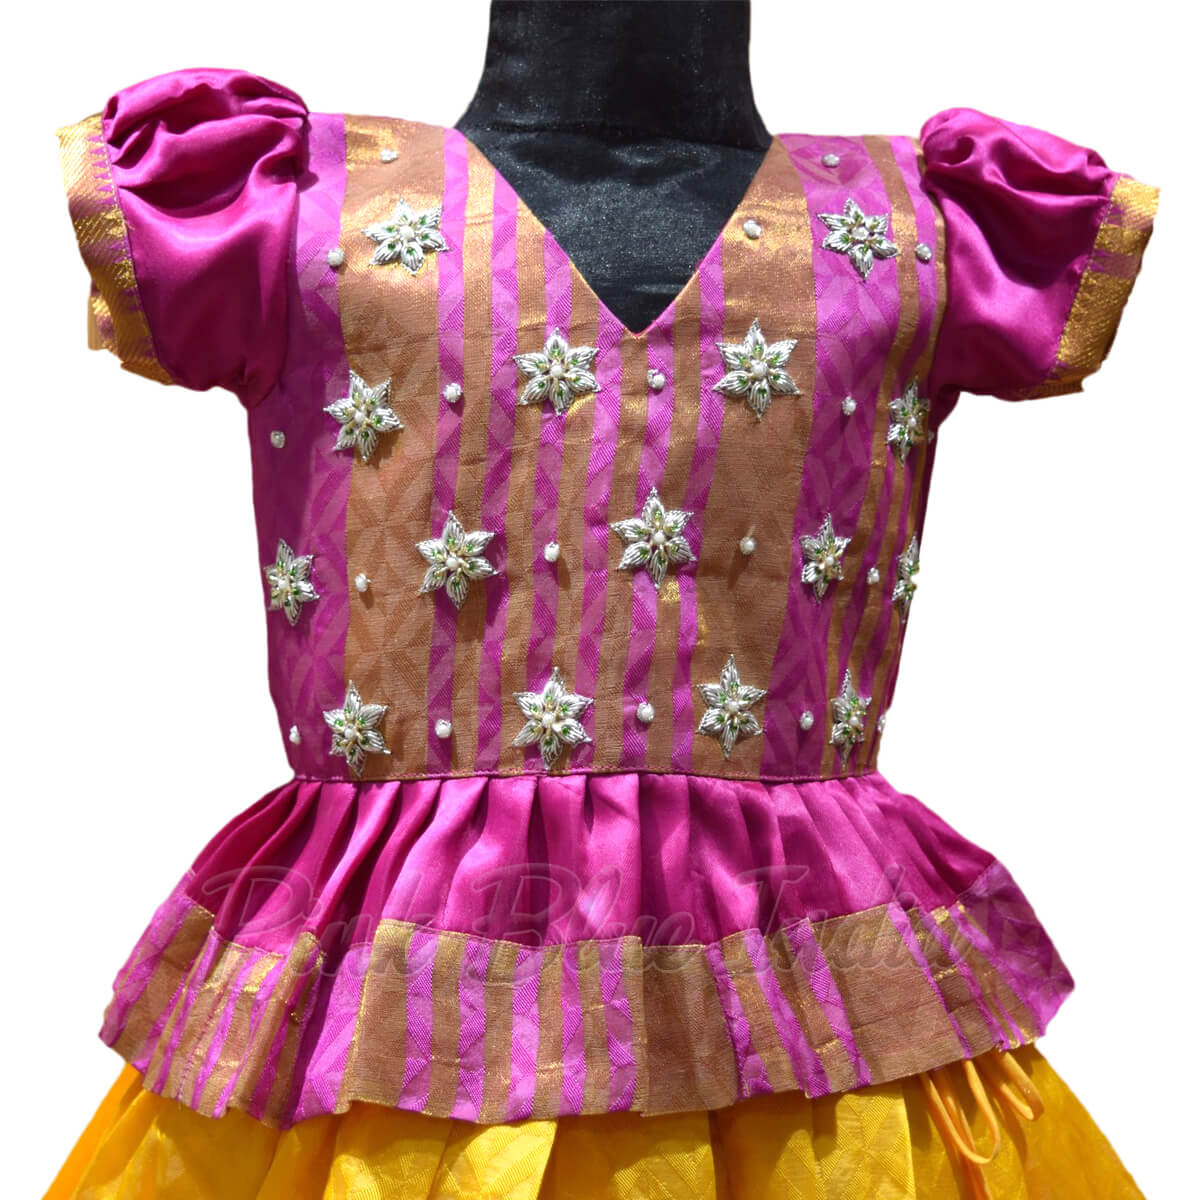 Pink Indian Gowns - Buy Indian Gown online at Clothsvilla.com